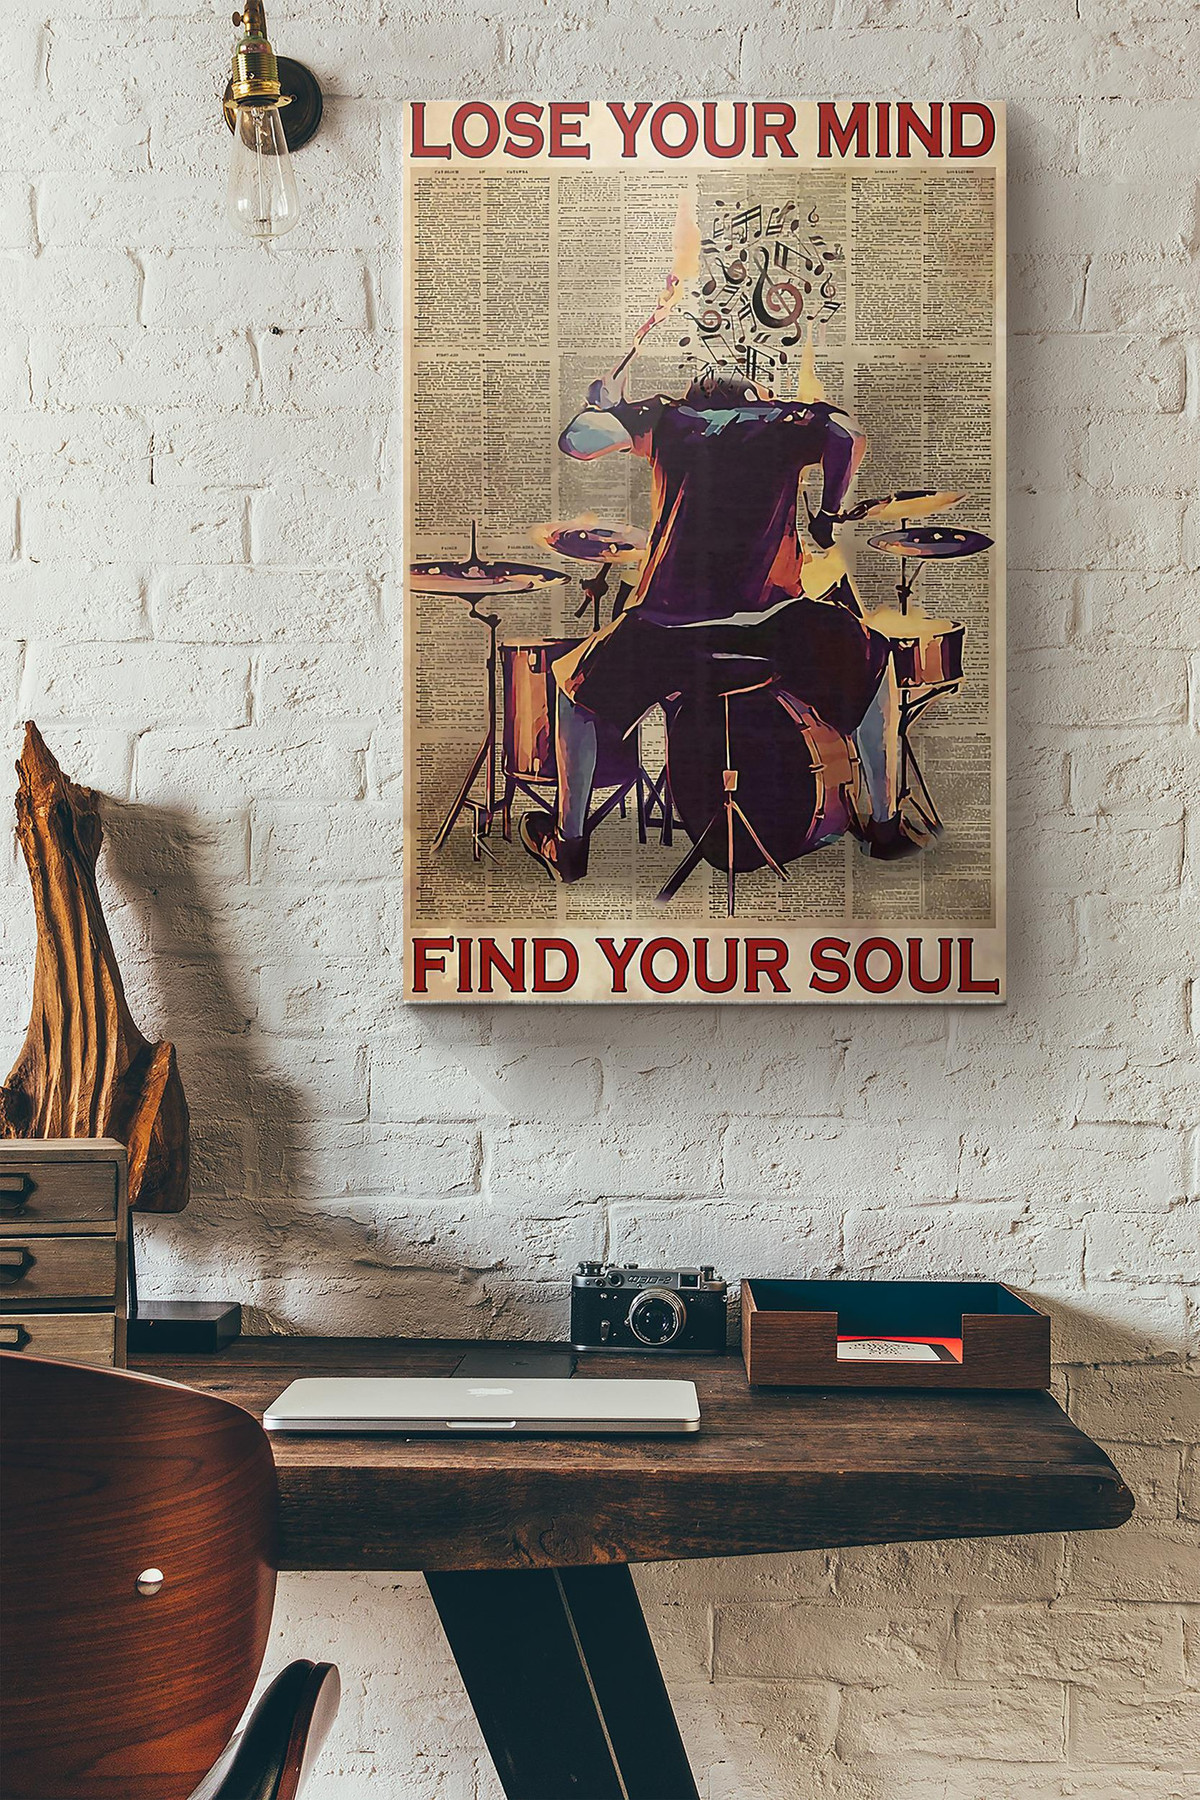 Book Page Drummer Lose Your Mind Find Your Soul Canvas Painting Ideas, Canvas Hanging Prints, Gift Idea Framed Prints, Canvas Paintings Wrapped Canvas 8x10